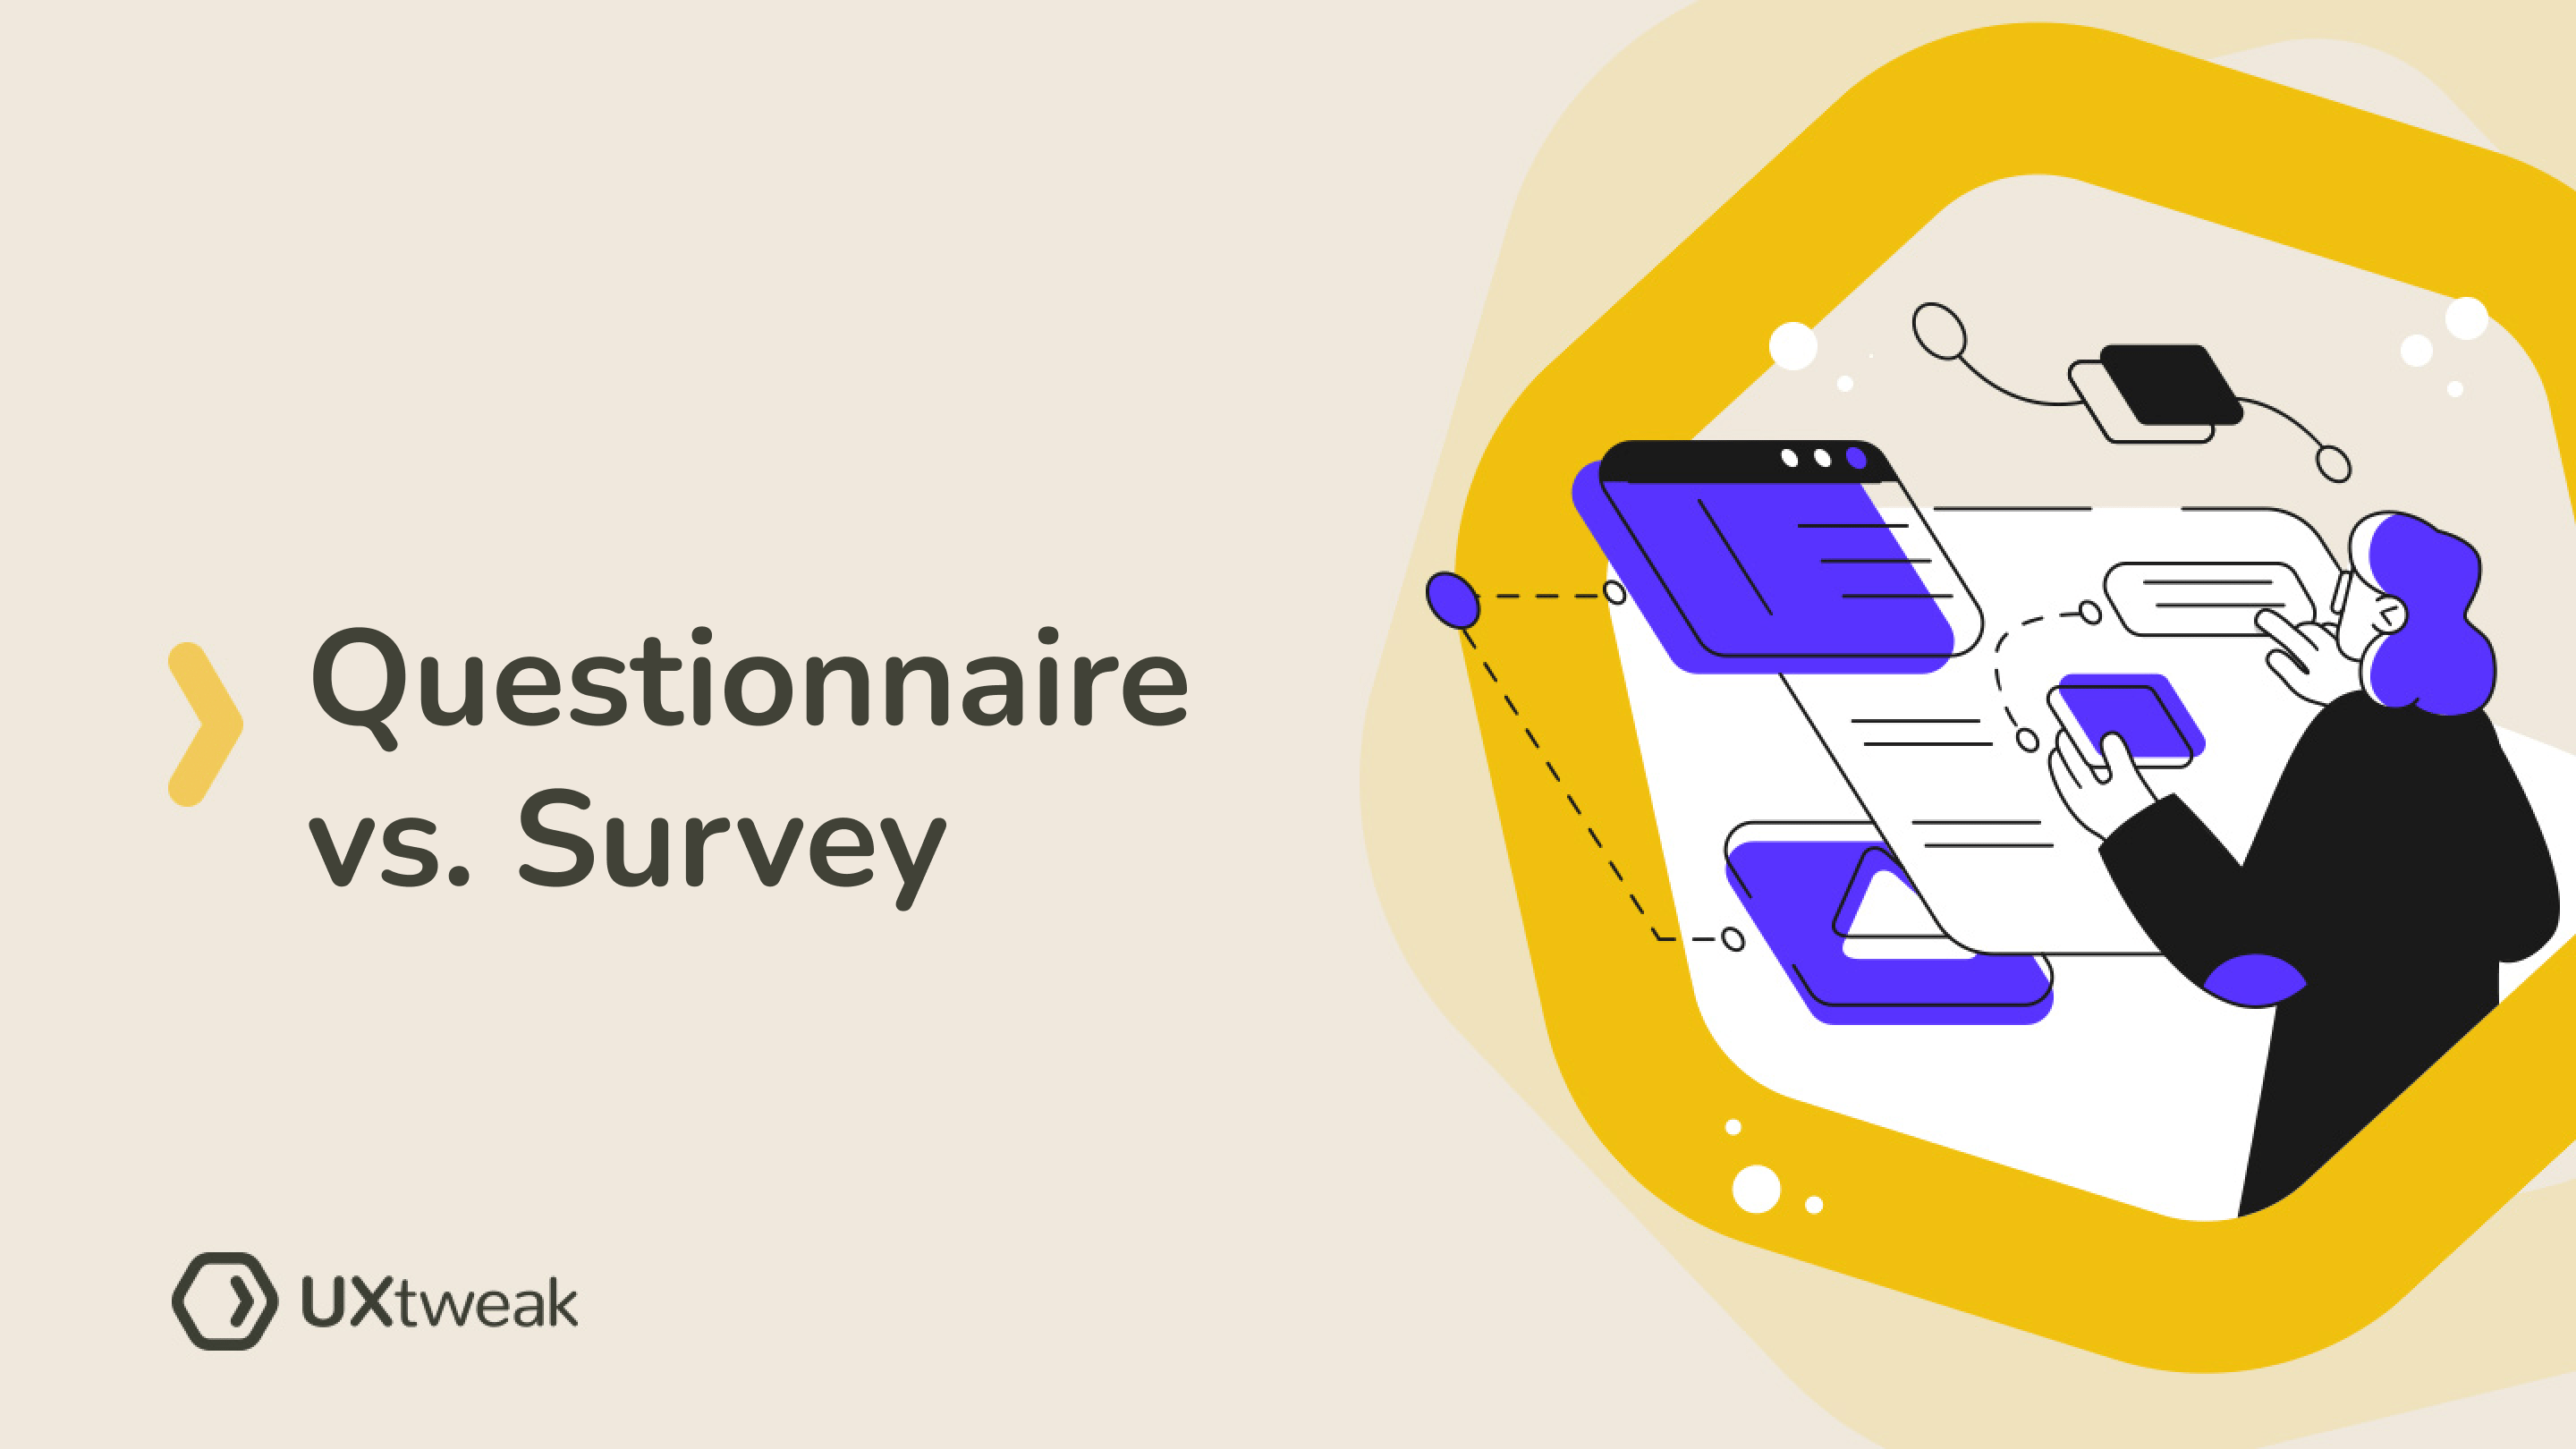 Questionnaire vs Survey: What’s the Difference?